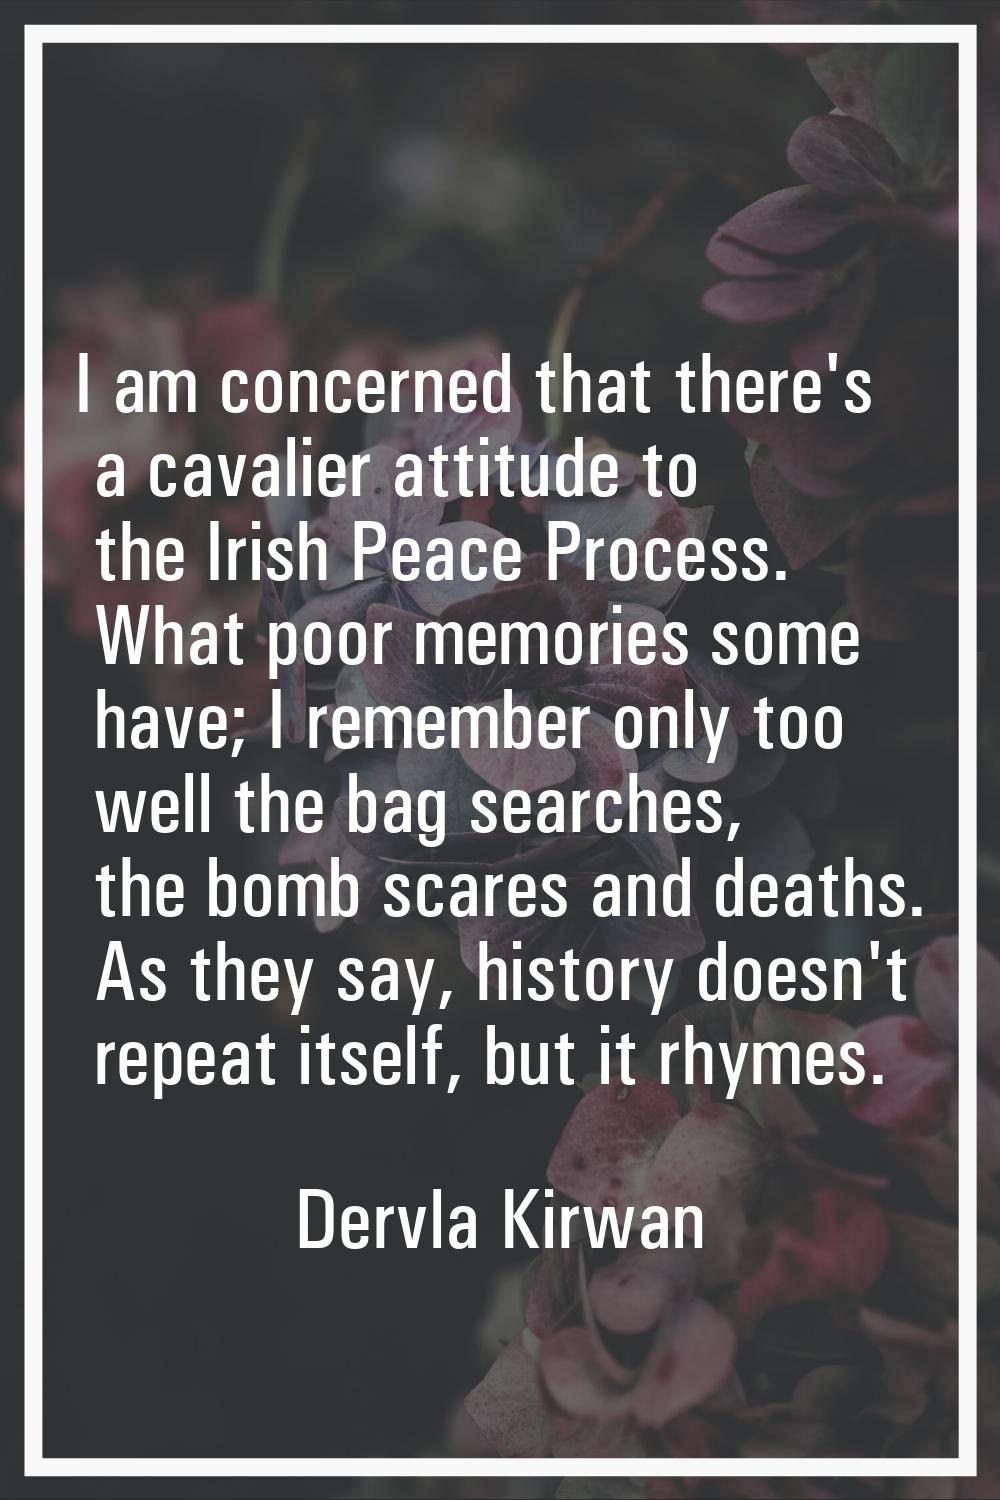 I am concerned that there's a cavalier attitude to the Irish Peace Process. What poor memories some